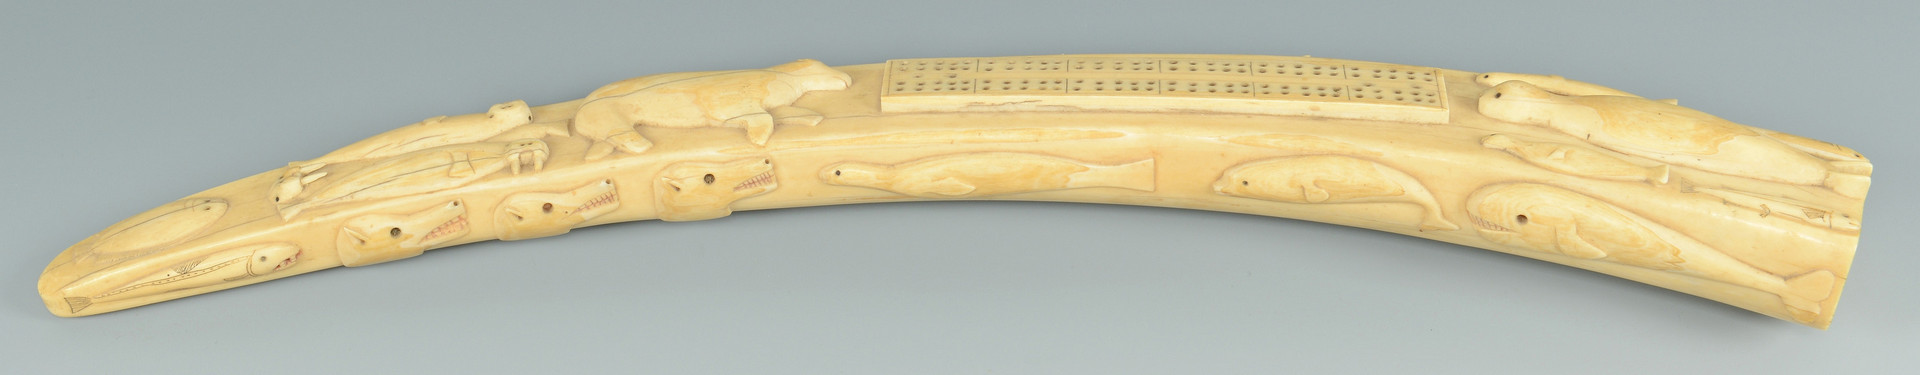 Lot 319: Early Inuit Carved Cribbage Board, Walrus